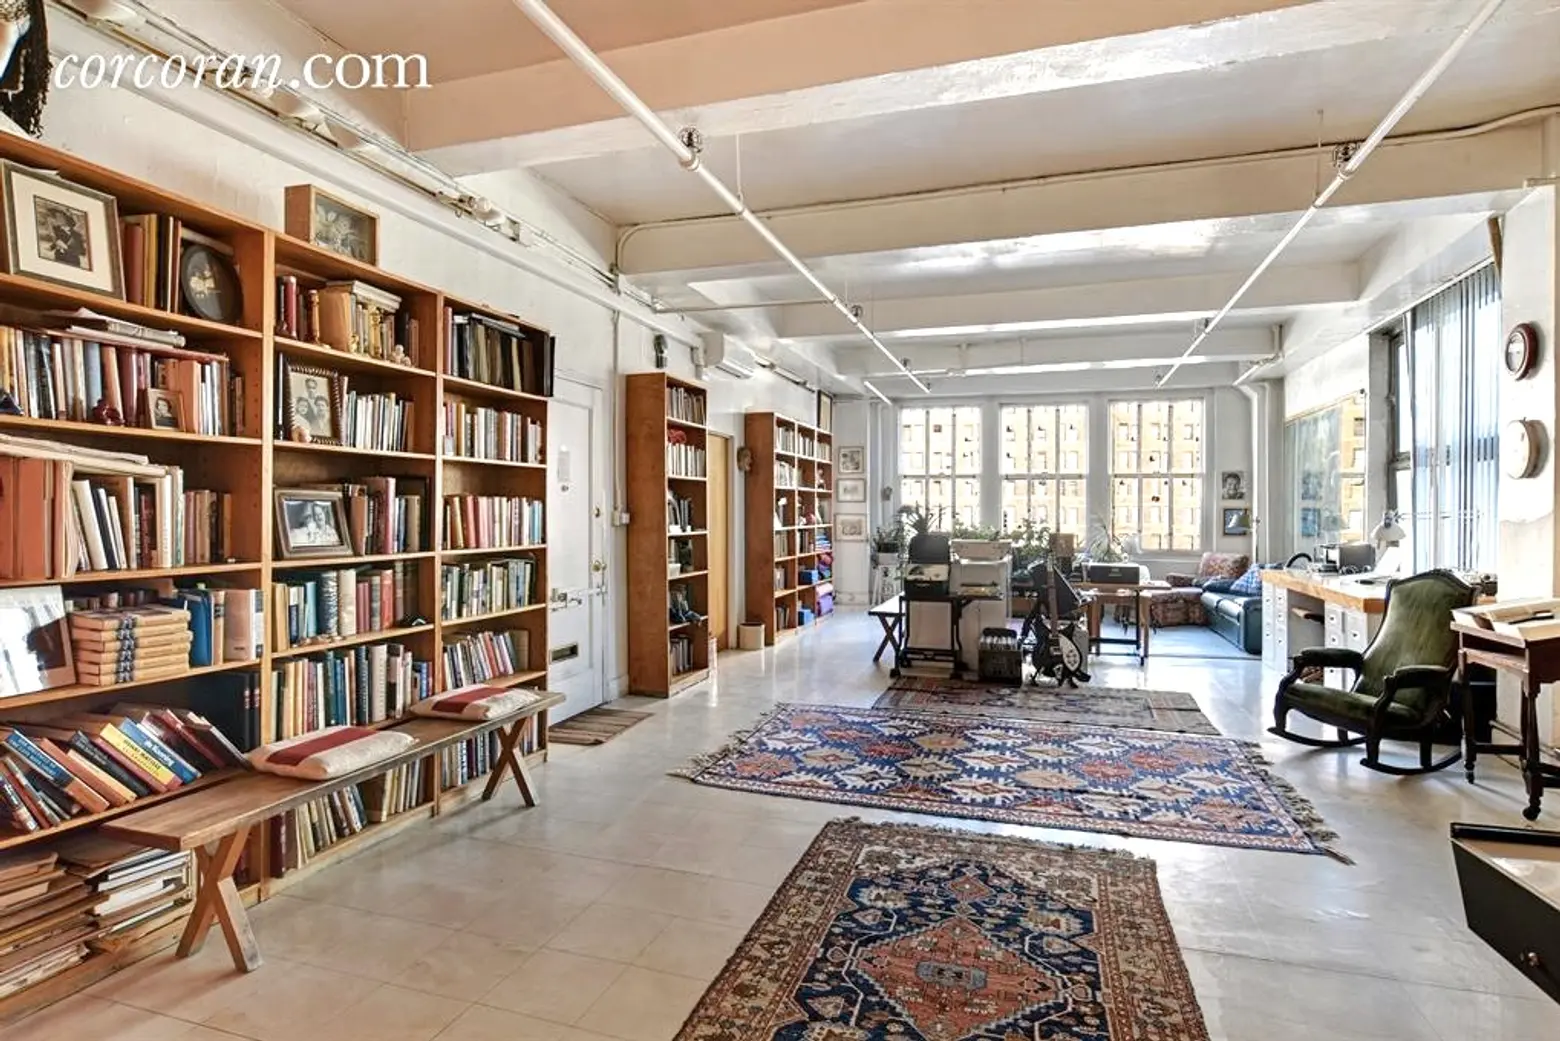 Rows of Bookshelves Under 11-Foot Ceilings Line This $2M Nomad Loft